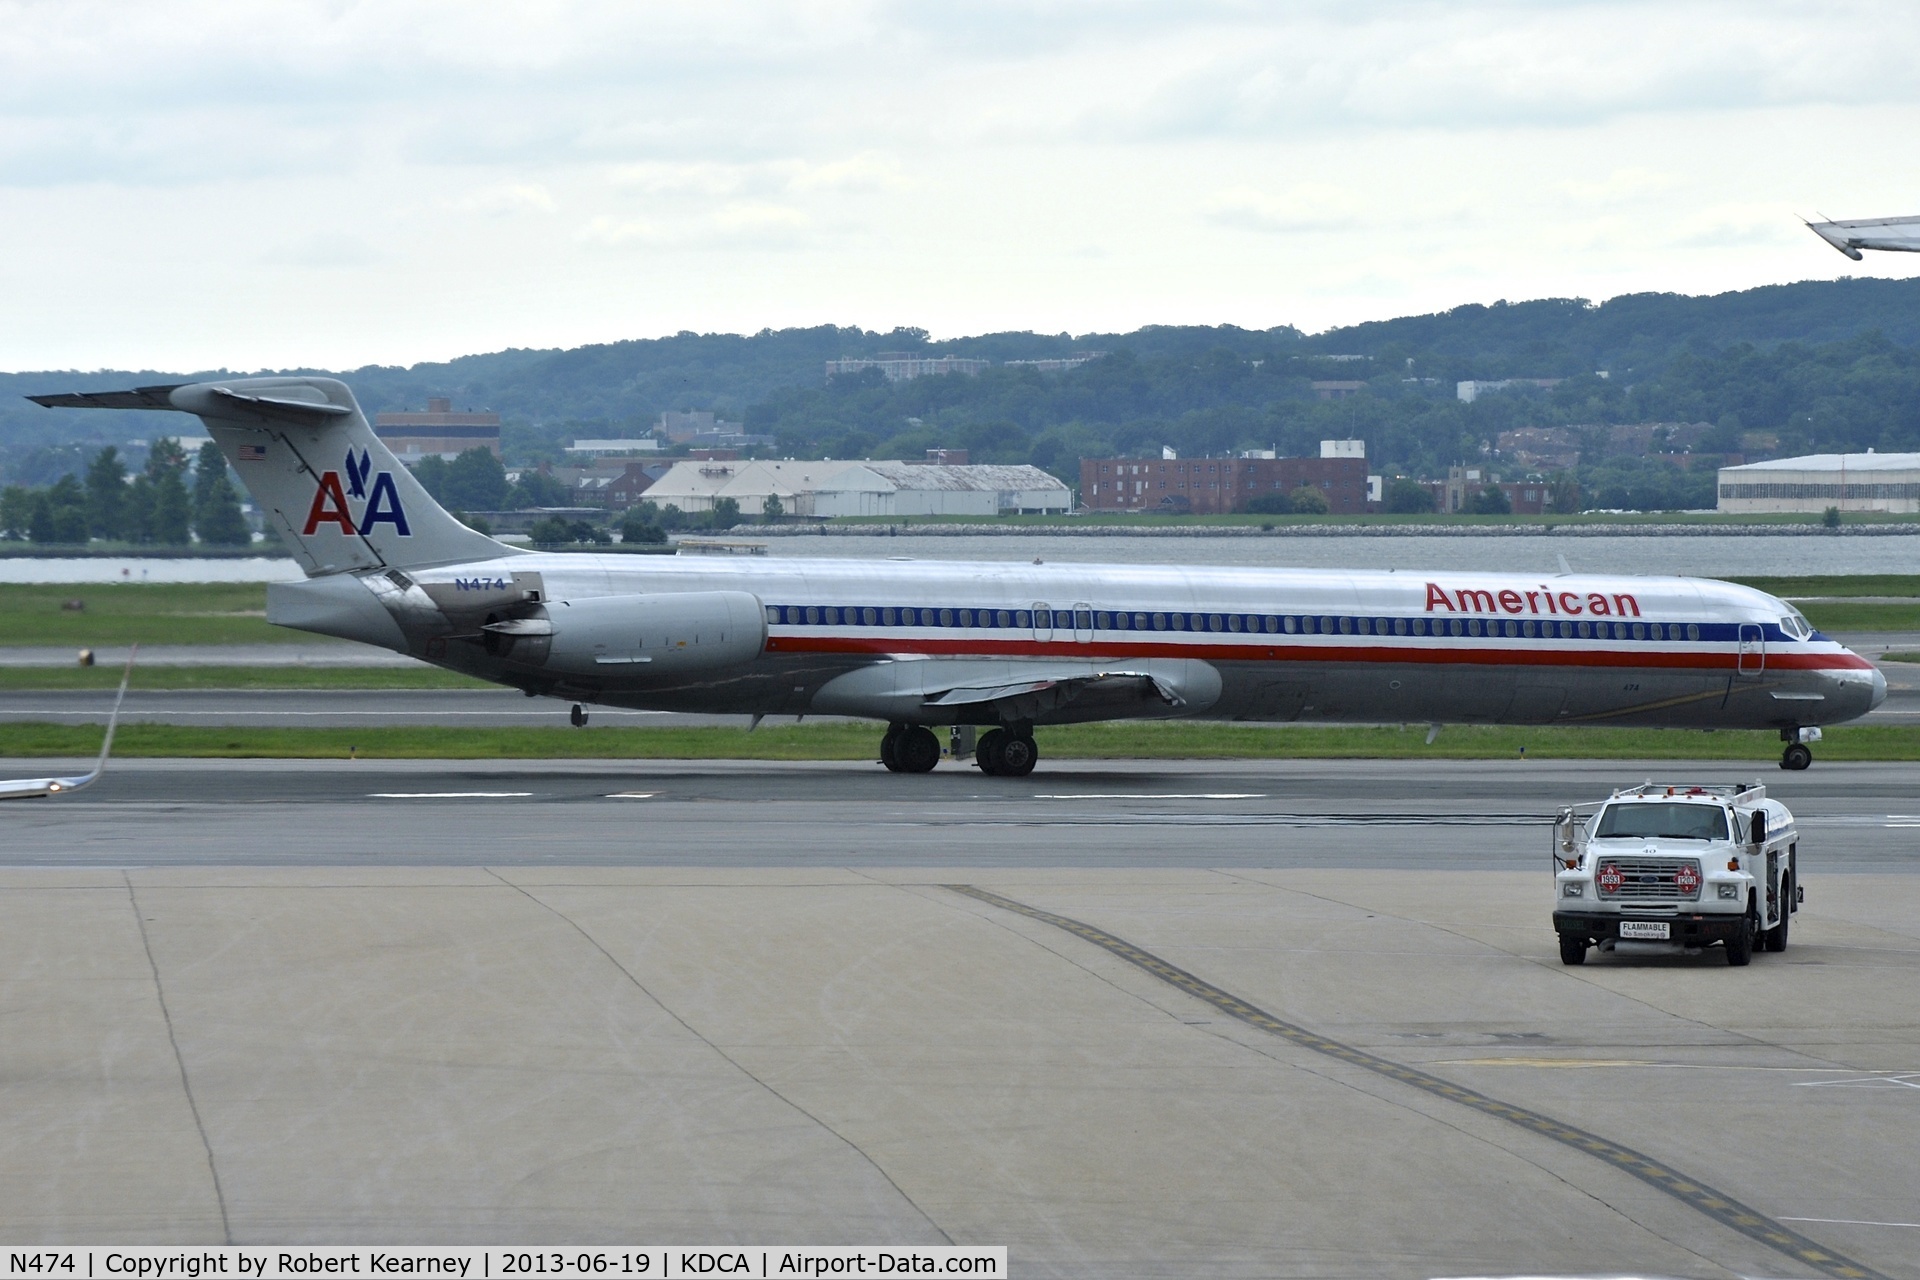 N474, 1988 McDonnell Douglas MD-82 (DC-9-82) C/N 49649, Taxiing out for departure